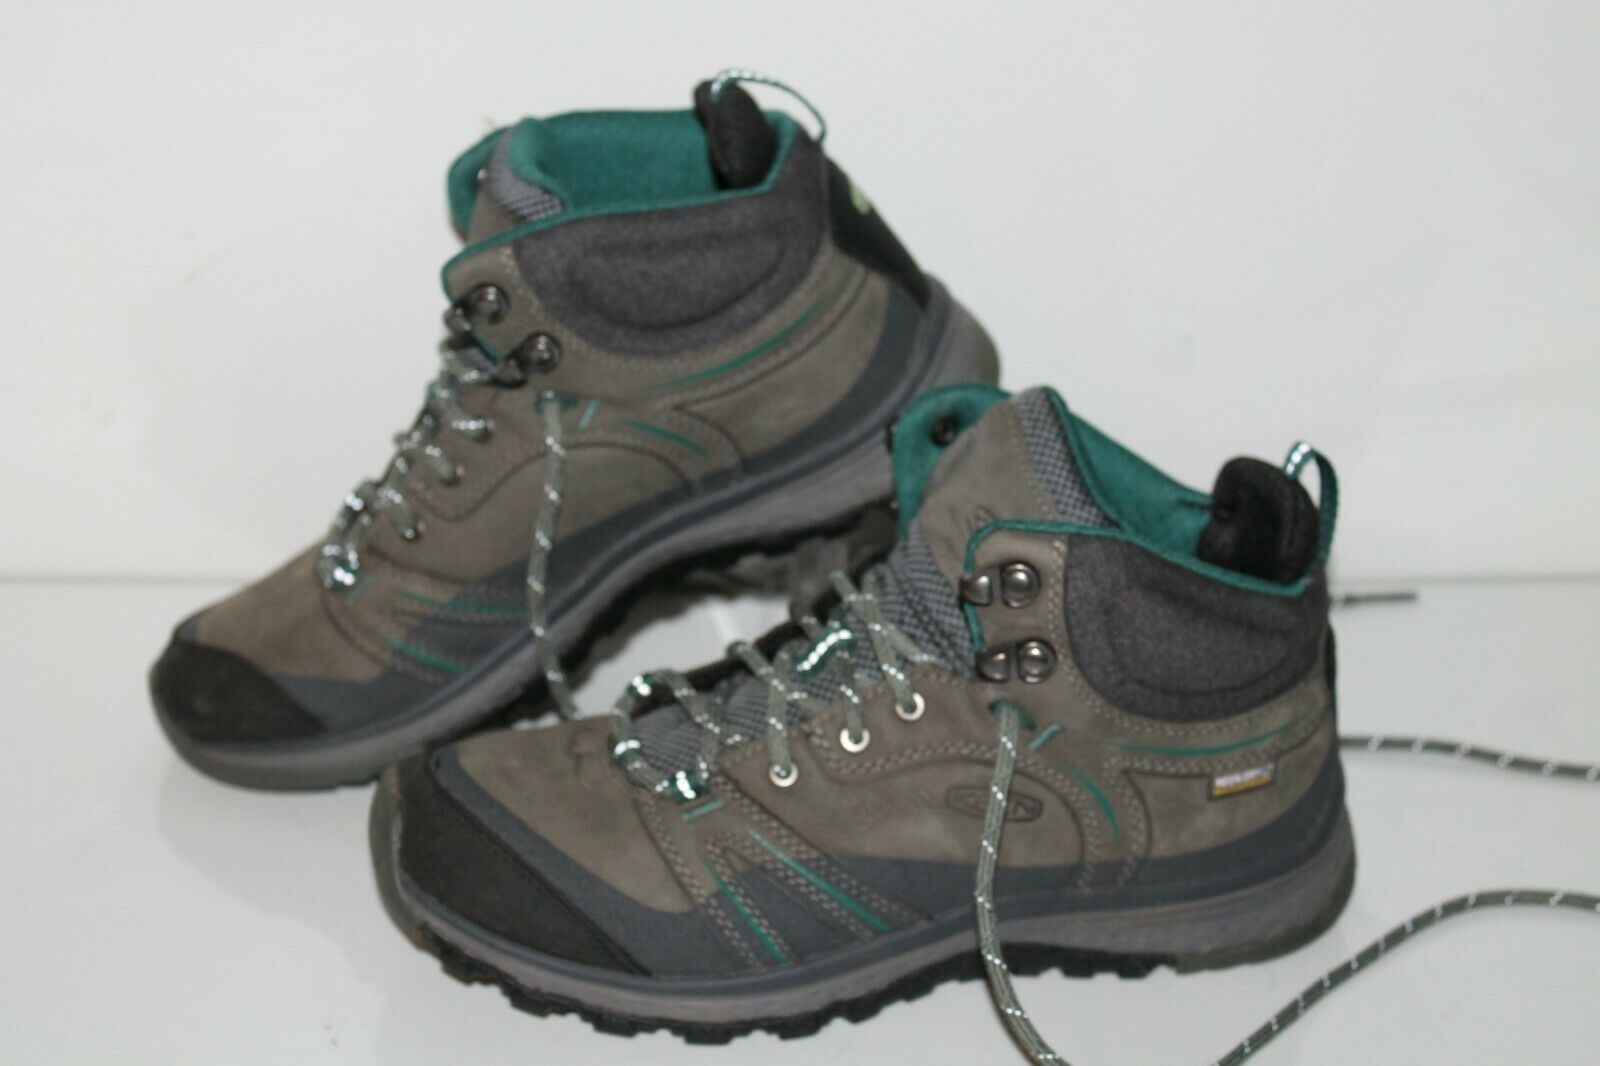 KEEN Koven Mid Hiking Boots, #1017750, Gray, Leather, Women's US Size 7